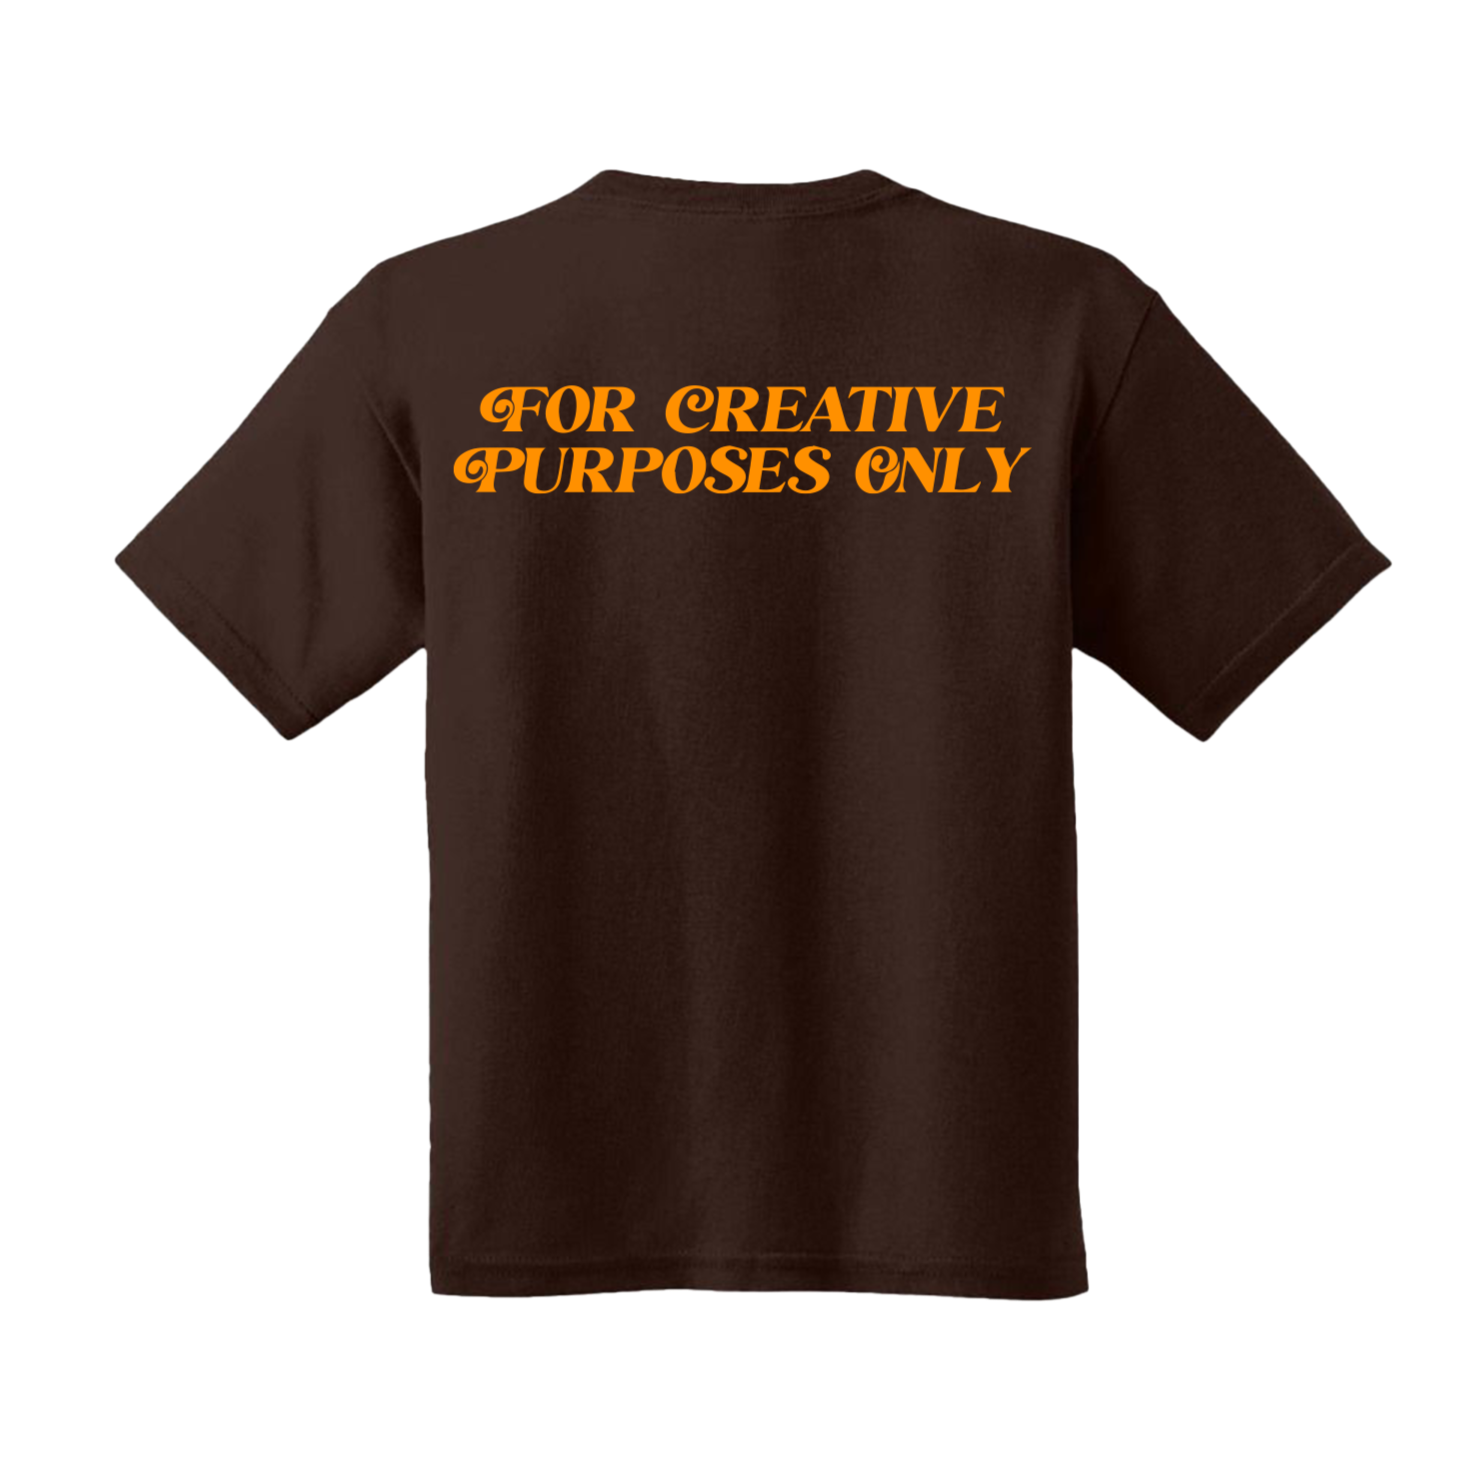 For Creative Purposes Only - T-Shirt (Brown + Orange)